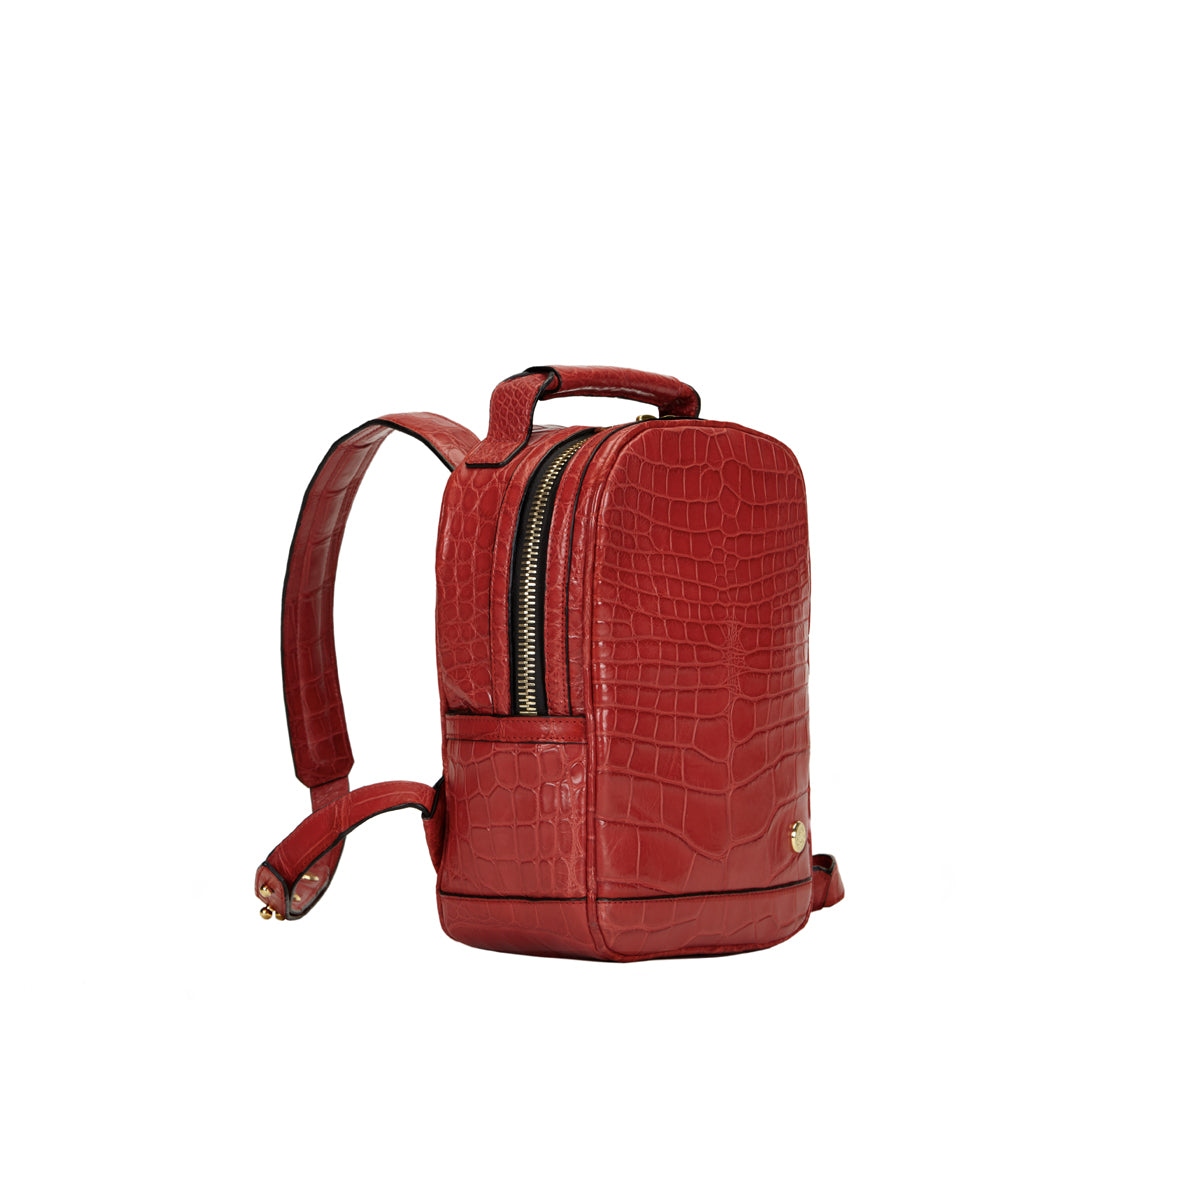 STALVEY Brighton Flat Front Backpack in Mini Red Alligator Front View